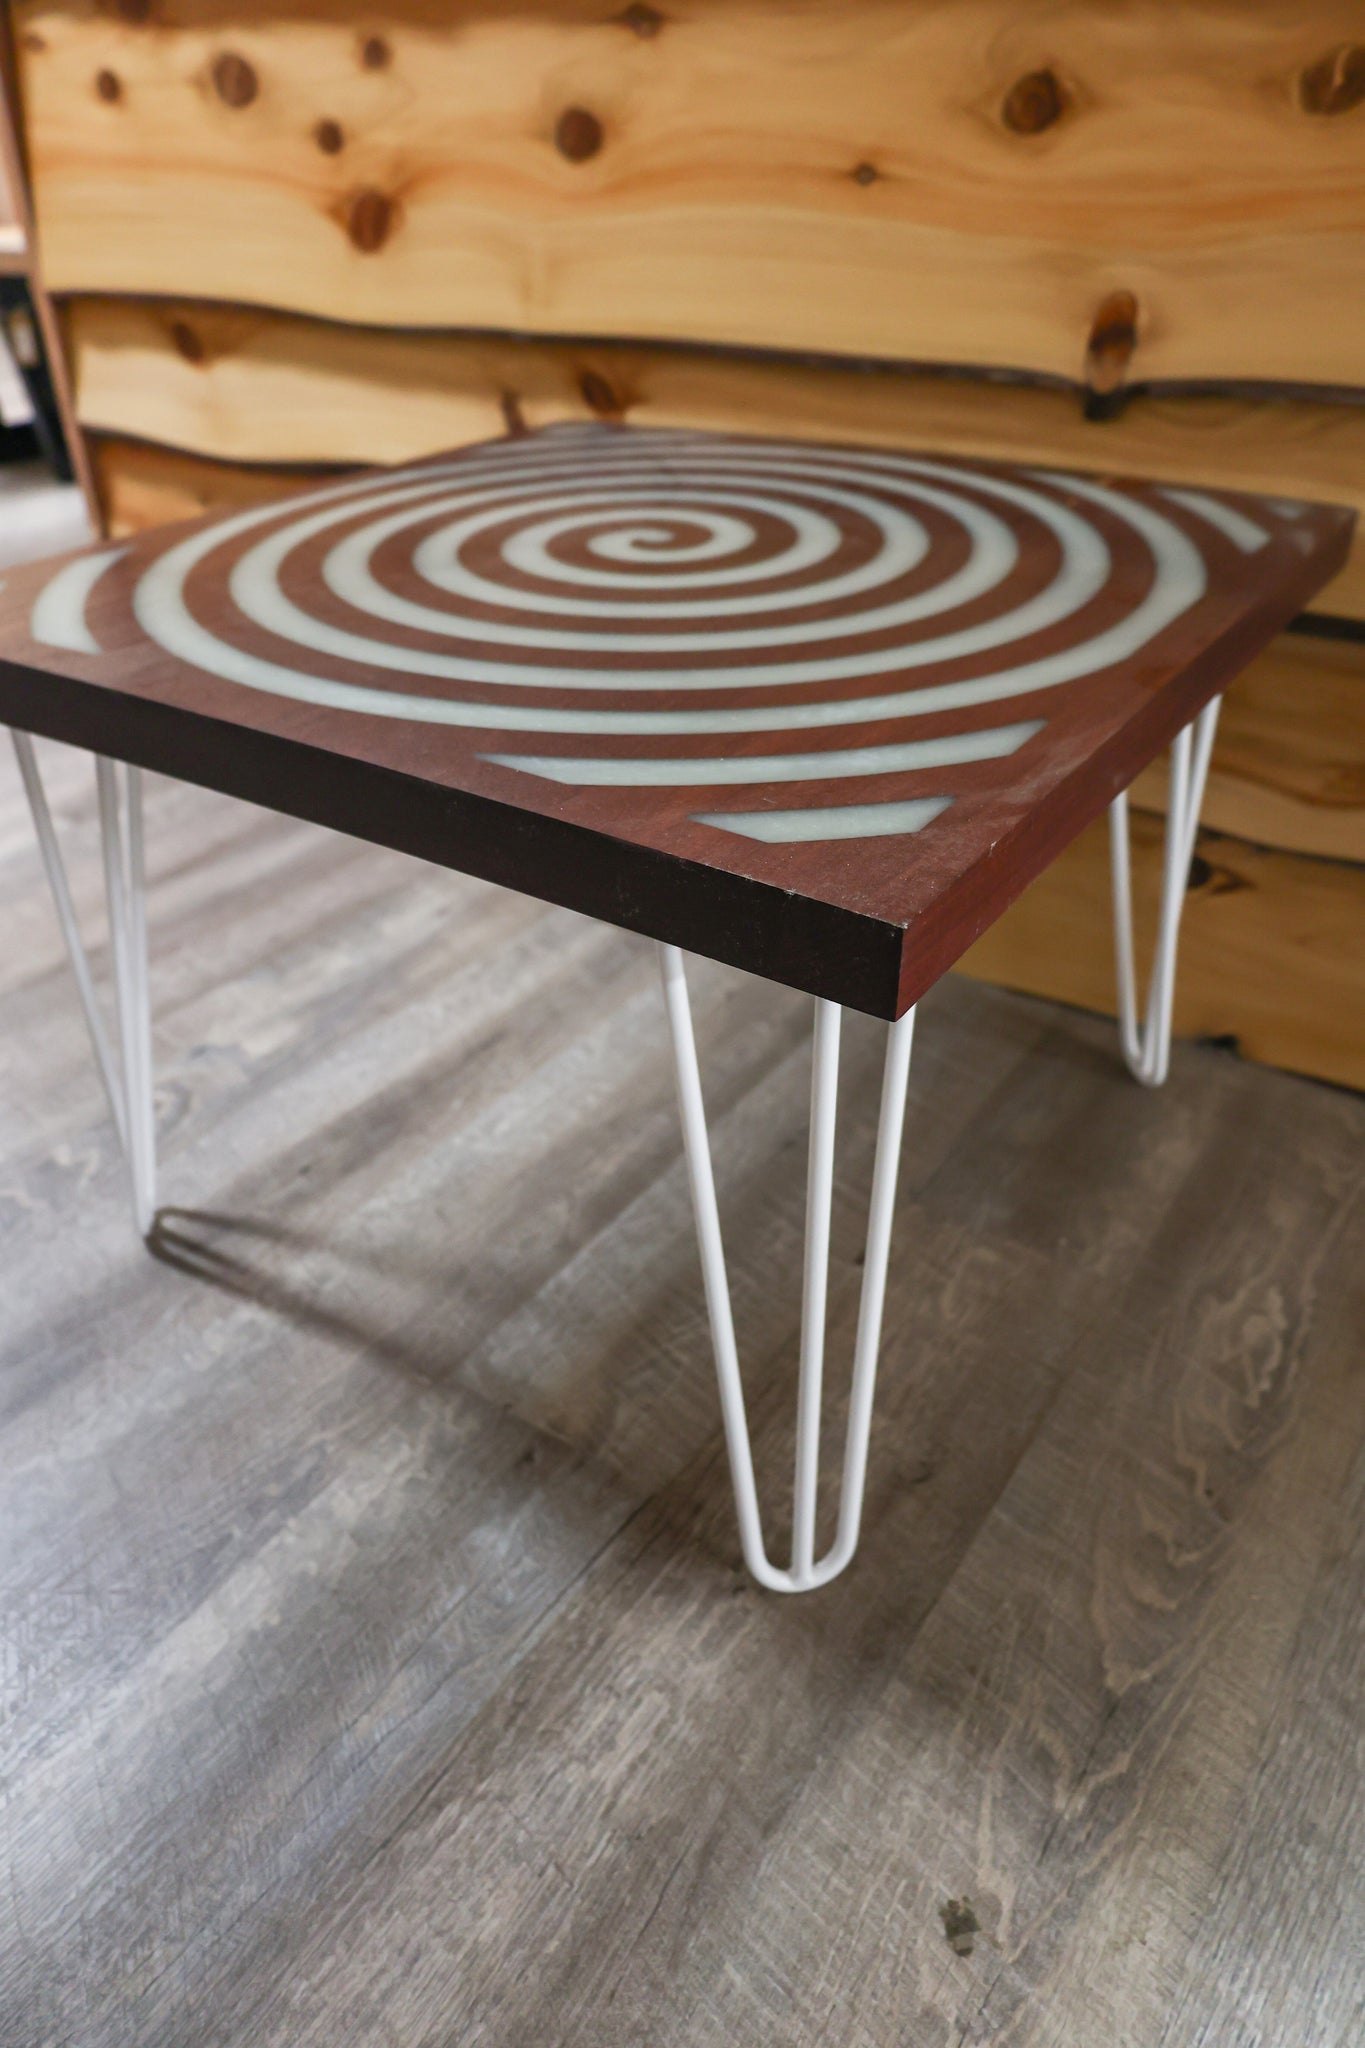 Purple Heart Spiral Table with White Hair Pin Legs - #94